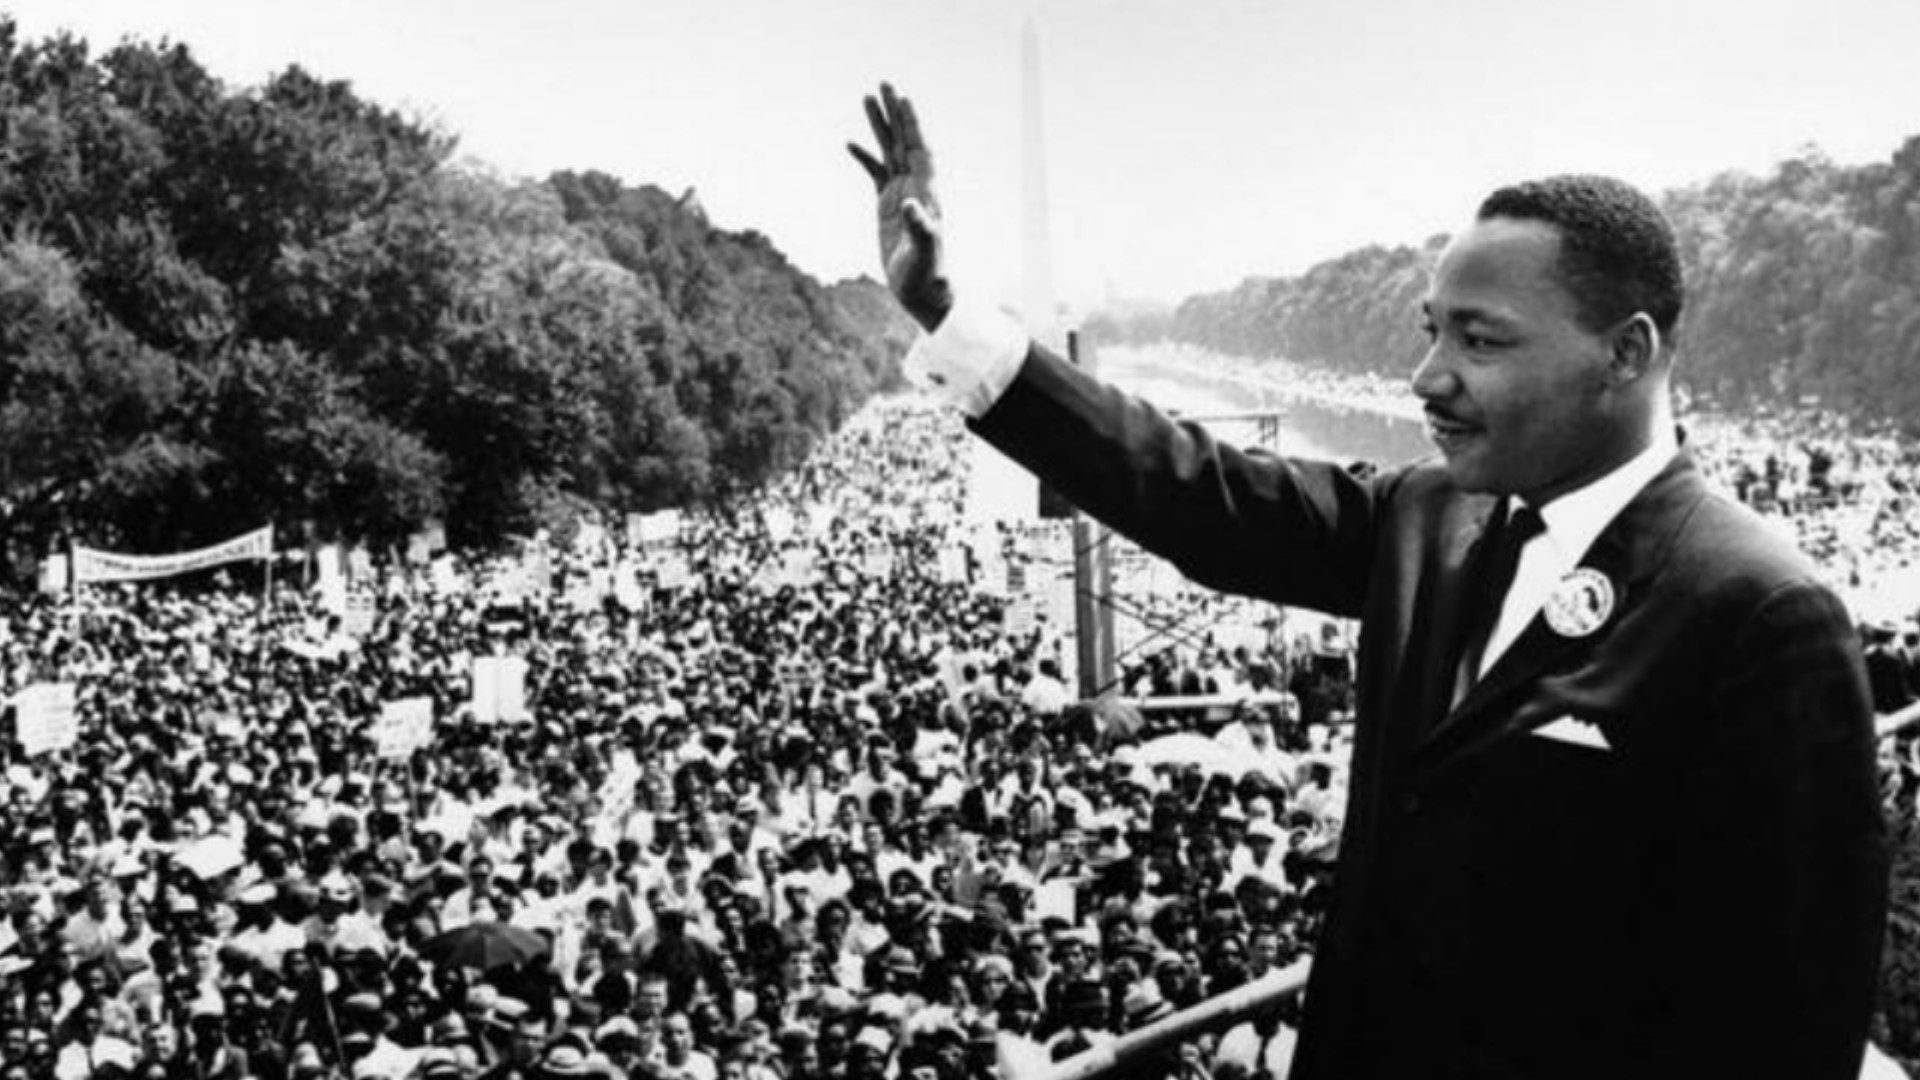 The civil rights icon Martin Luther King Jr. was killed on April 4, 1968.